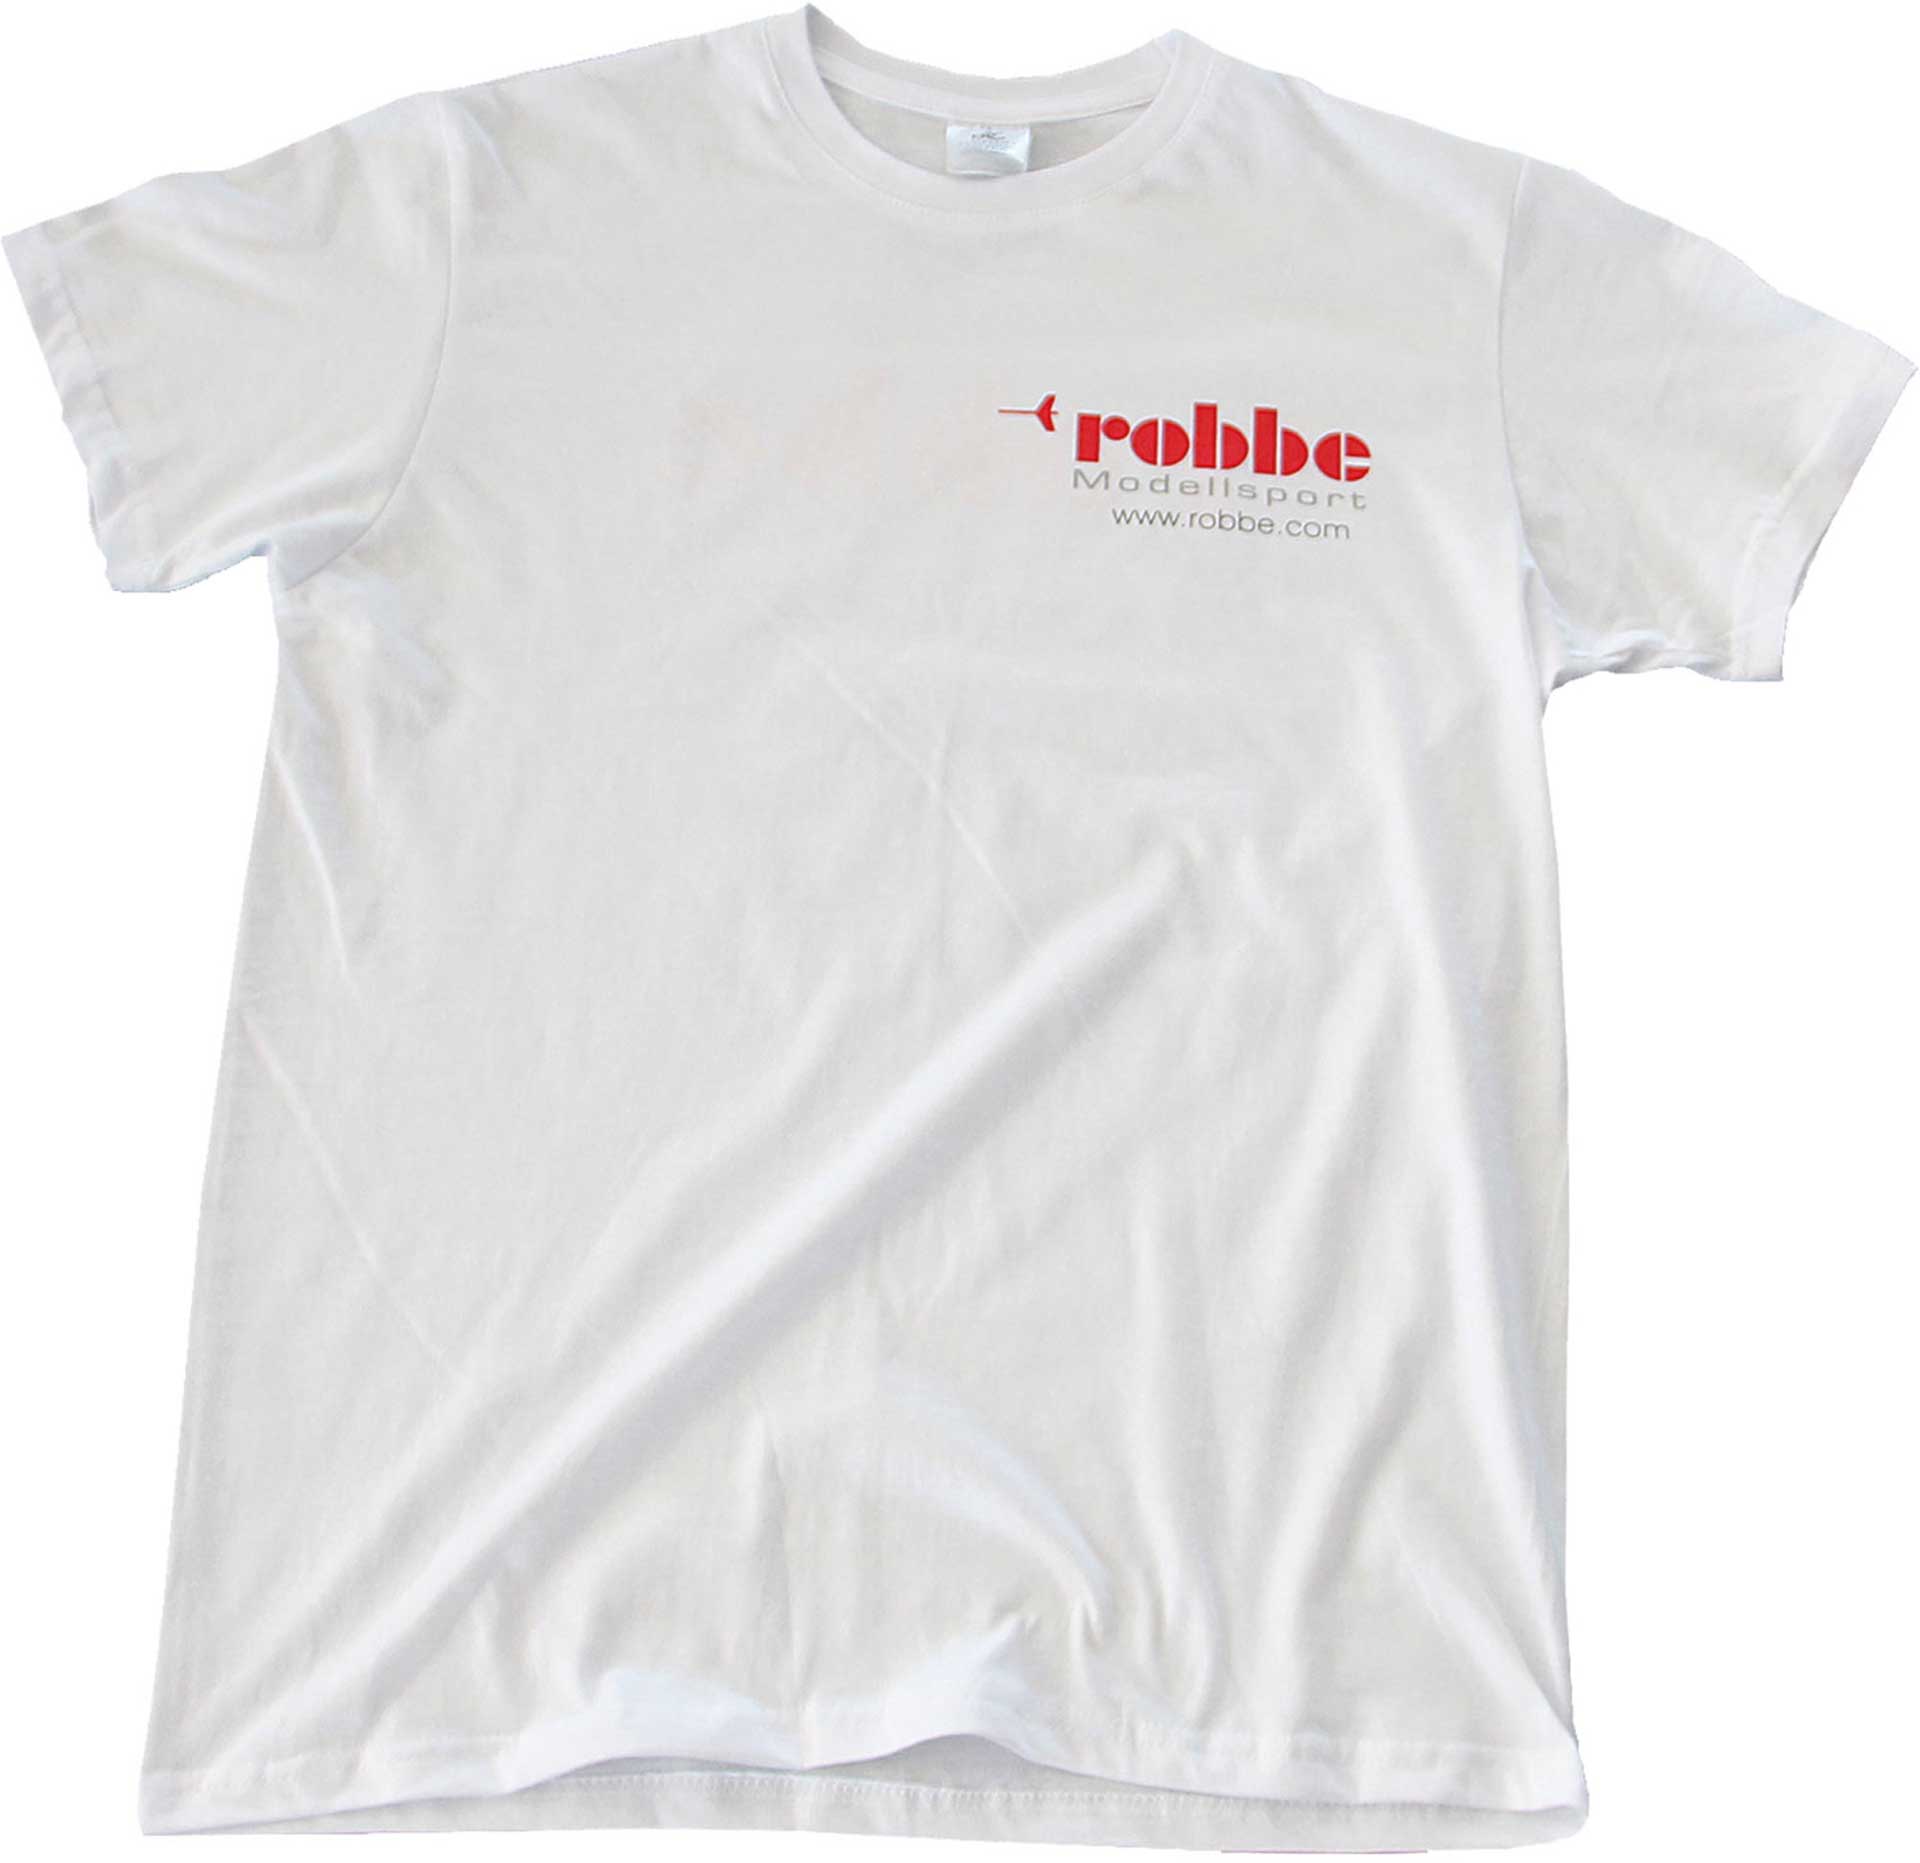 Robbe Modellsport T-SHIRT TAILLE S